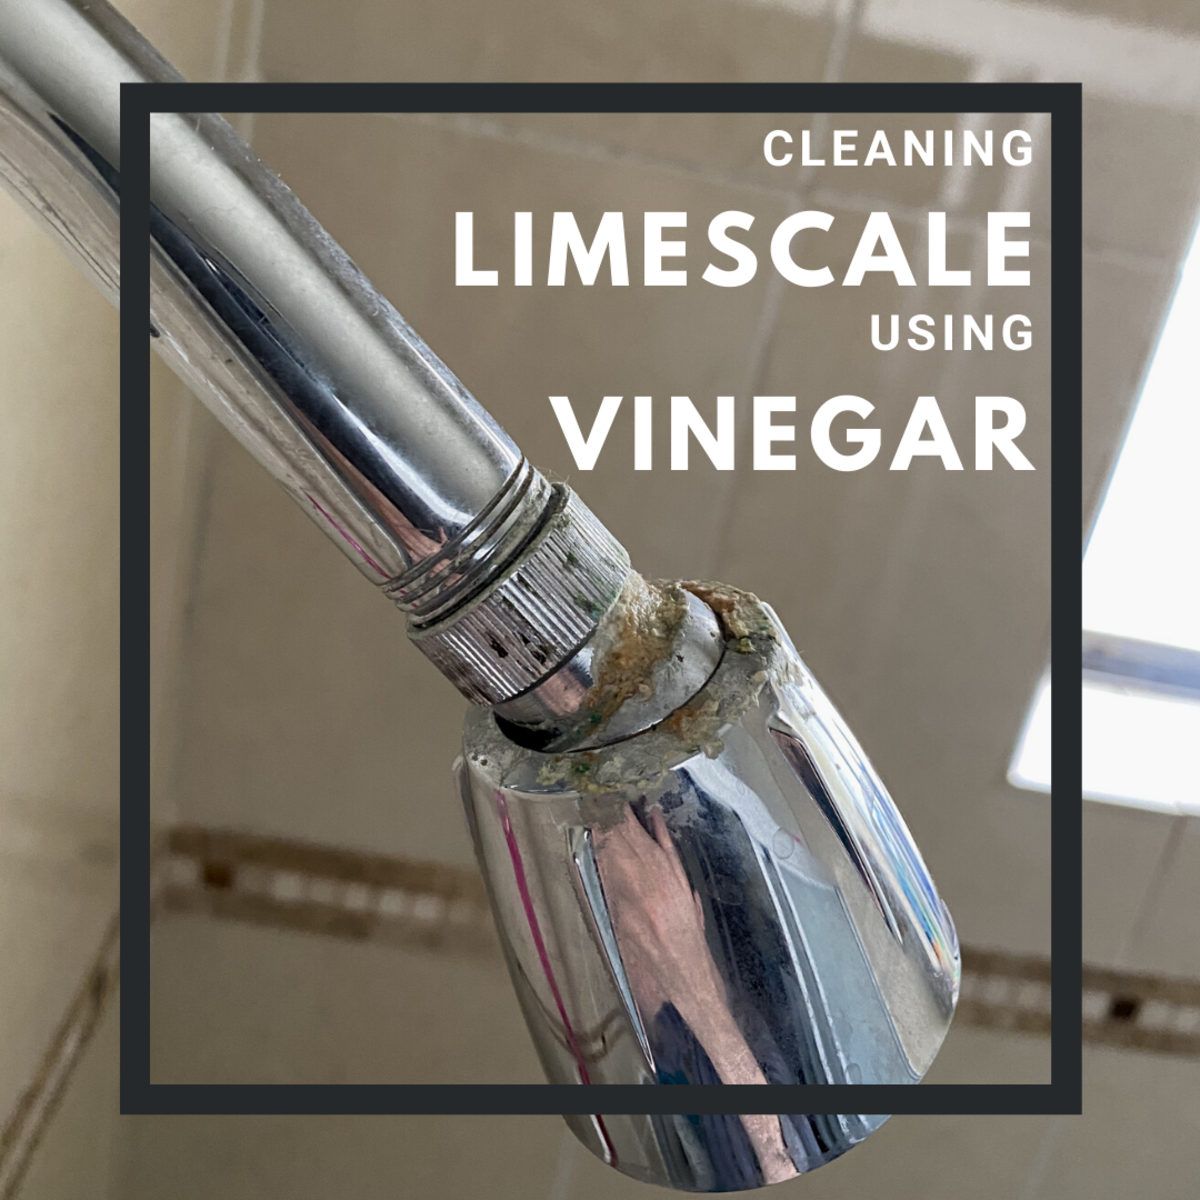 Vinegar or lemon juice can be just as effective at cleaning limescale as commercial products.